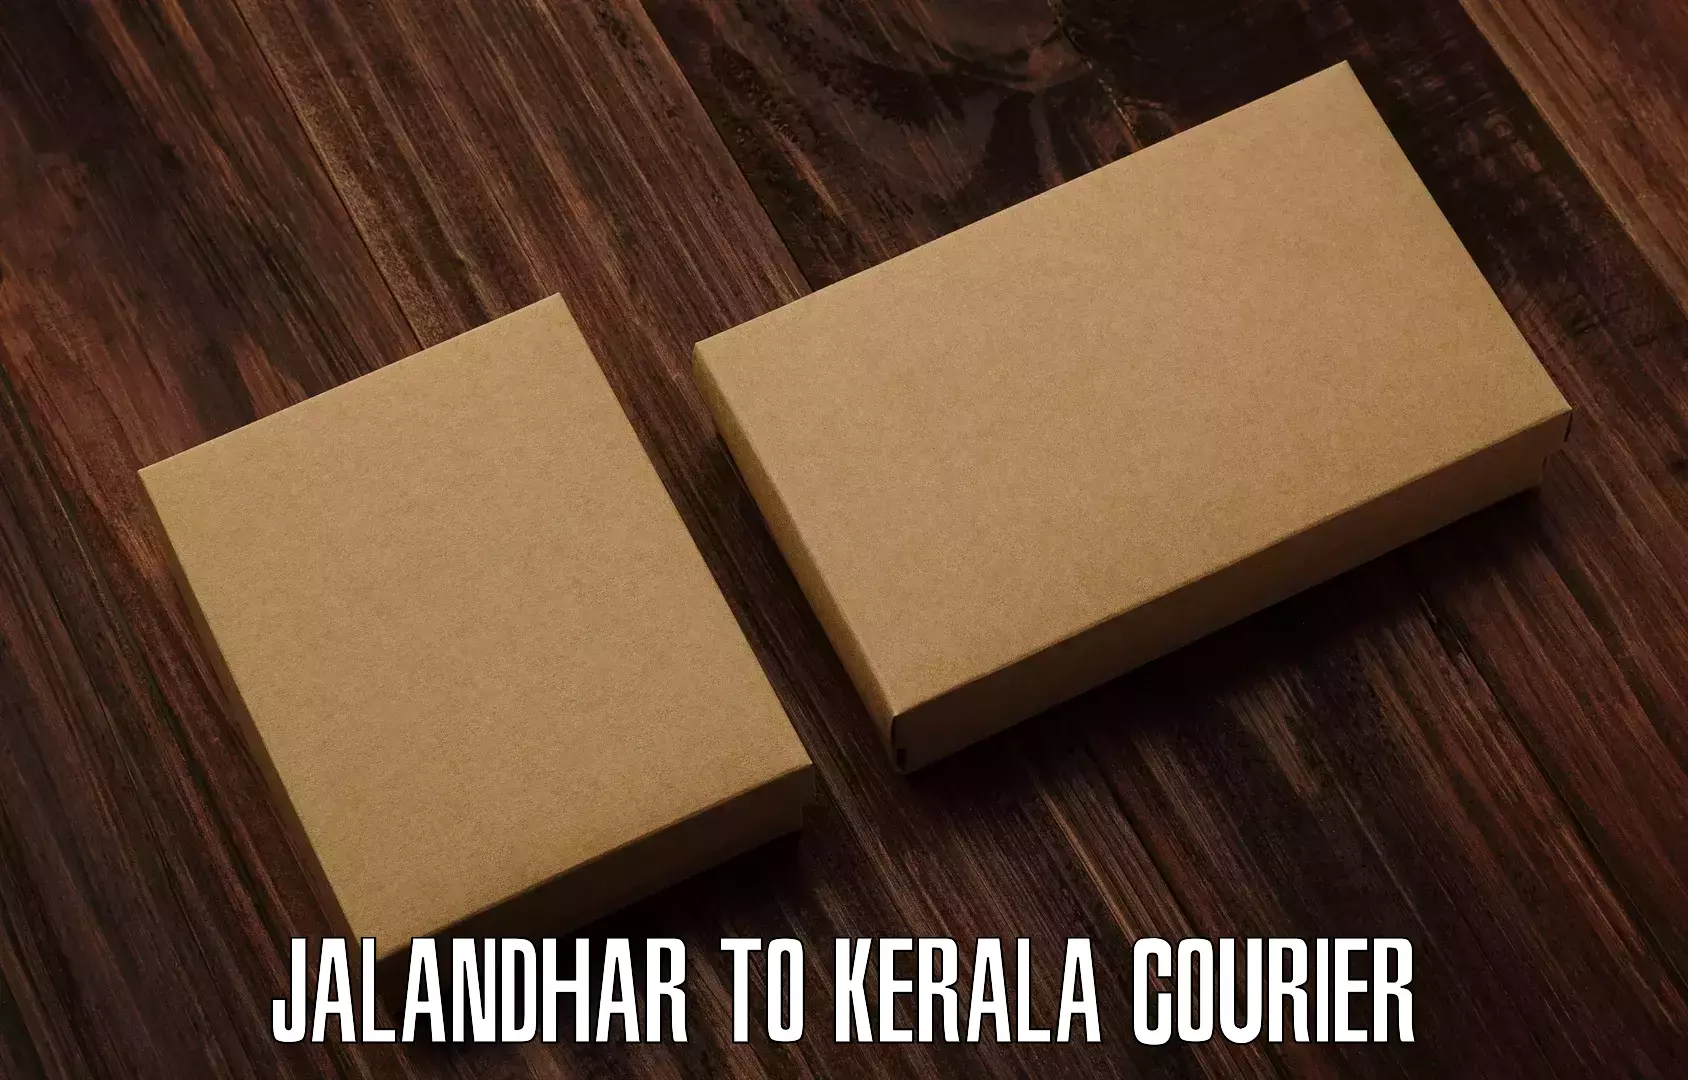 Flexible delivery schedules Jalandhar to Kerala